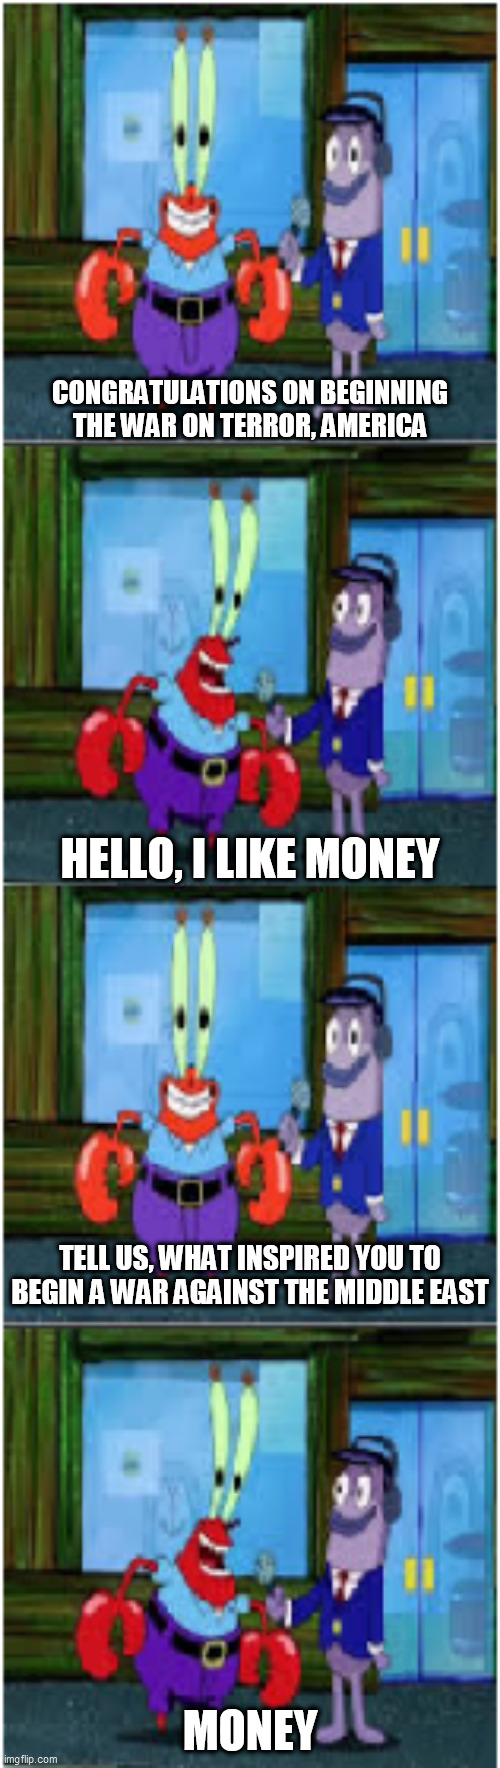 Mr. Krabs Money Extended | CONGRATULATIONS ON BEGINNING THE WAR ON TERROR, AMERICA; HELLO, I LIKE MONEY; TELL US, WHAT INSPIRED YOU TO BEGIN A WAR AGAINST THE MIDDLE EAST; MONEY | image tagged in mr krabs money extended,war on terror,america,united states,middle east,greed | made w/ Imgflip meme maker